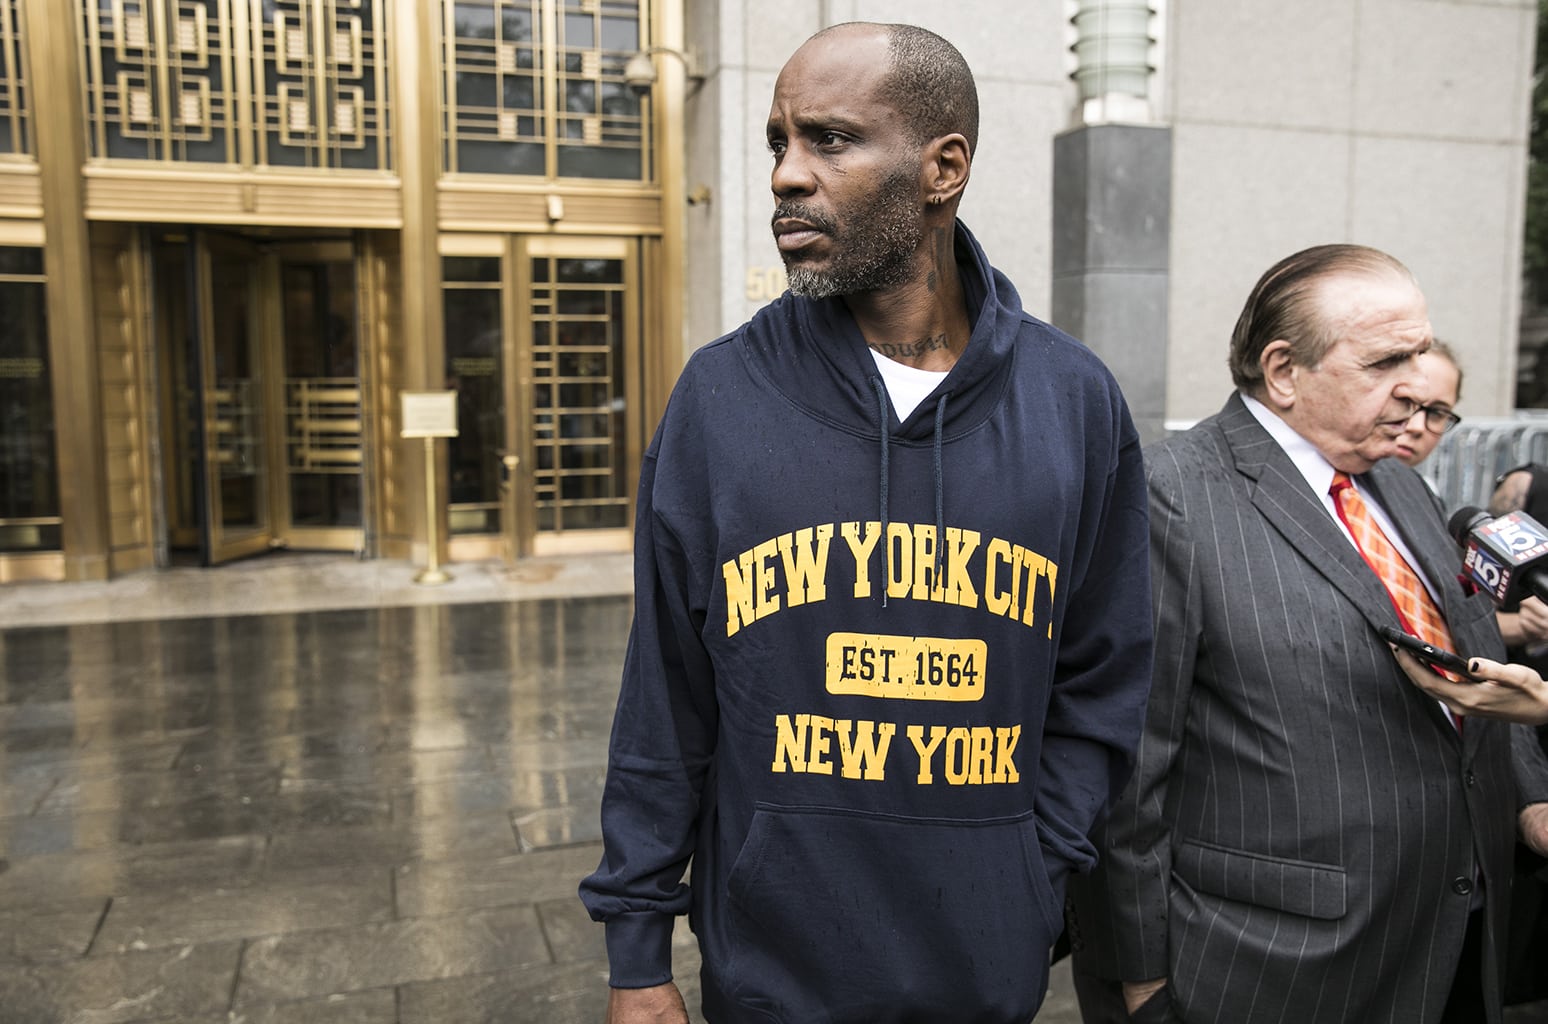 Dmx Breaks Silence About Facing 44 Years In The Federal Prison!!| Throwback